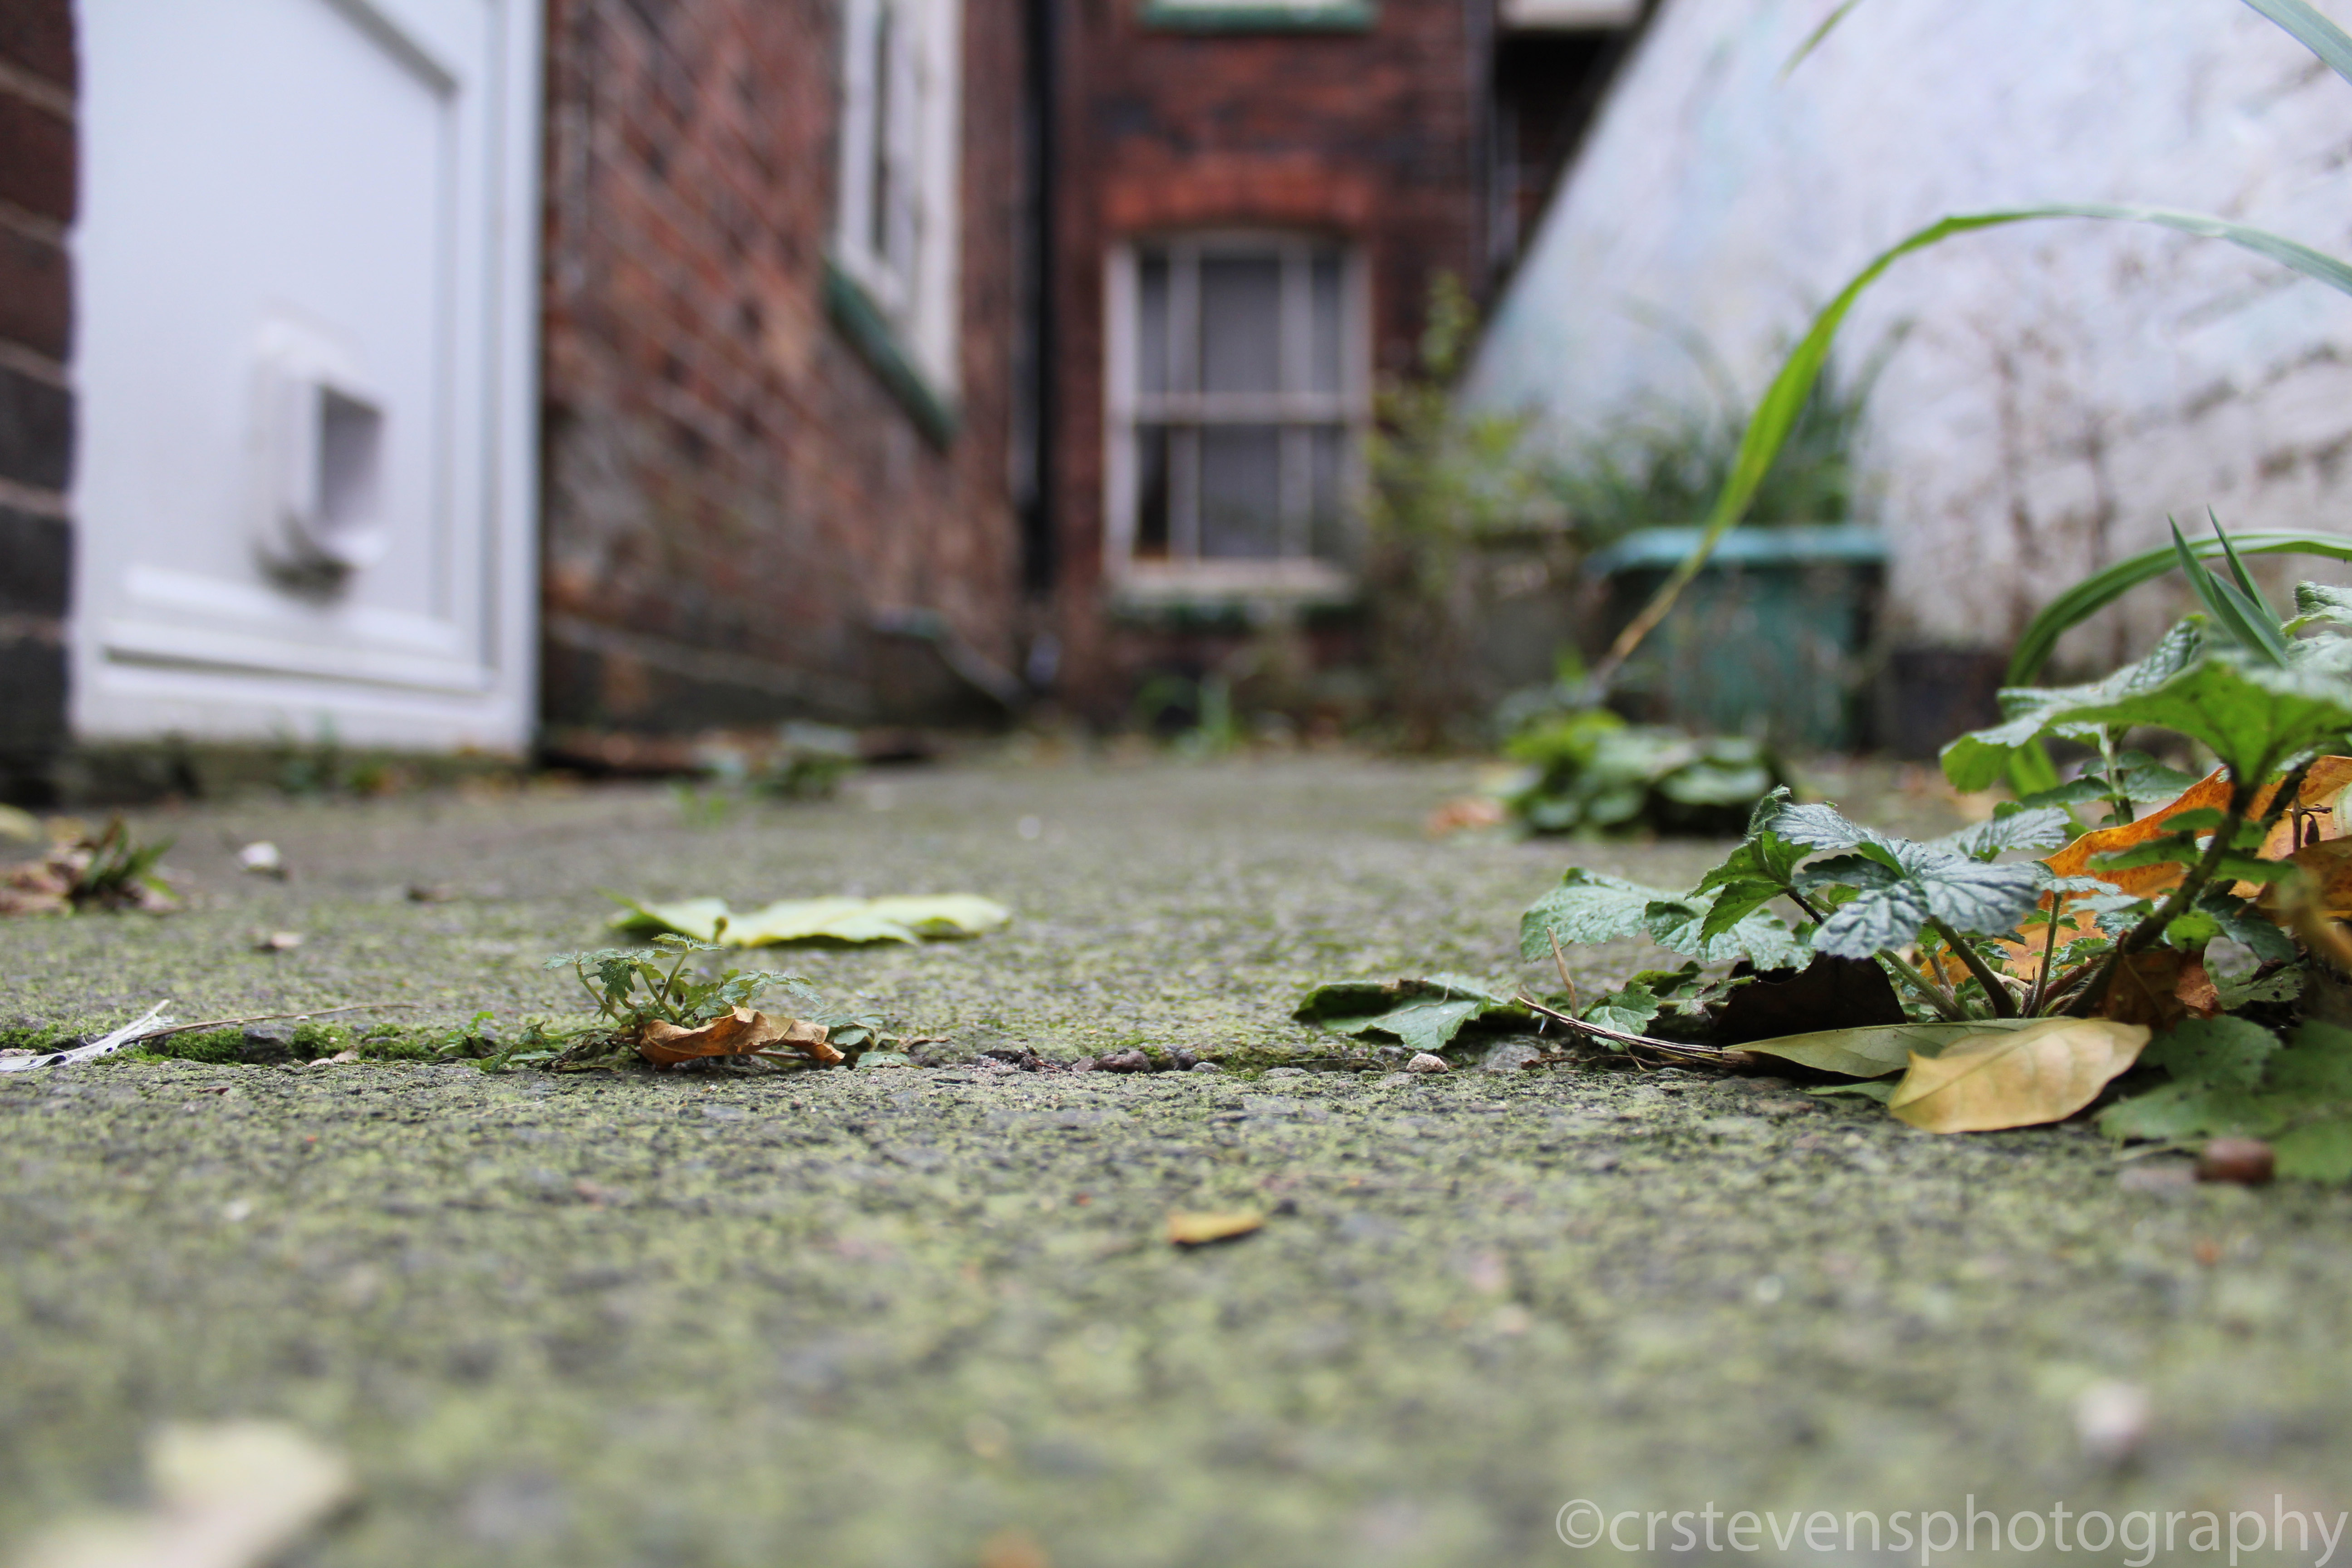 an alleyway from a low angle with some plants and the ground in focus and a door and window blurred in the background